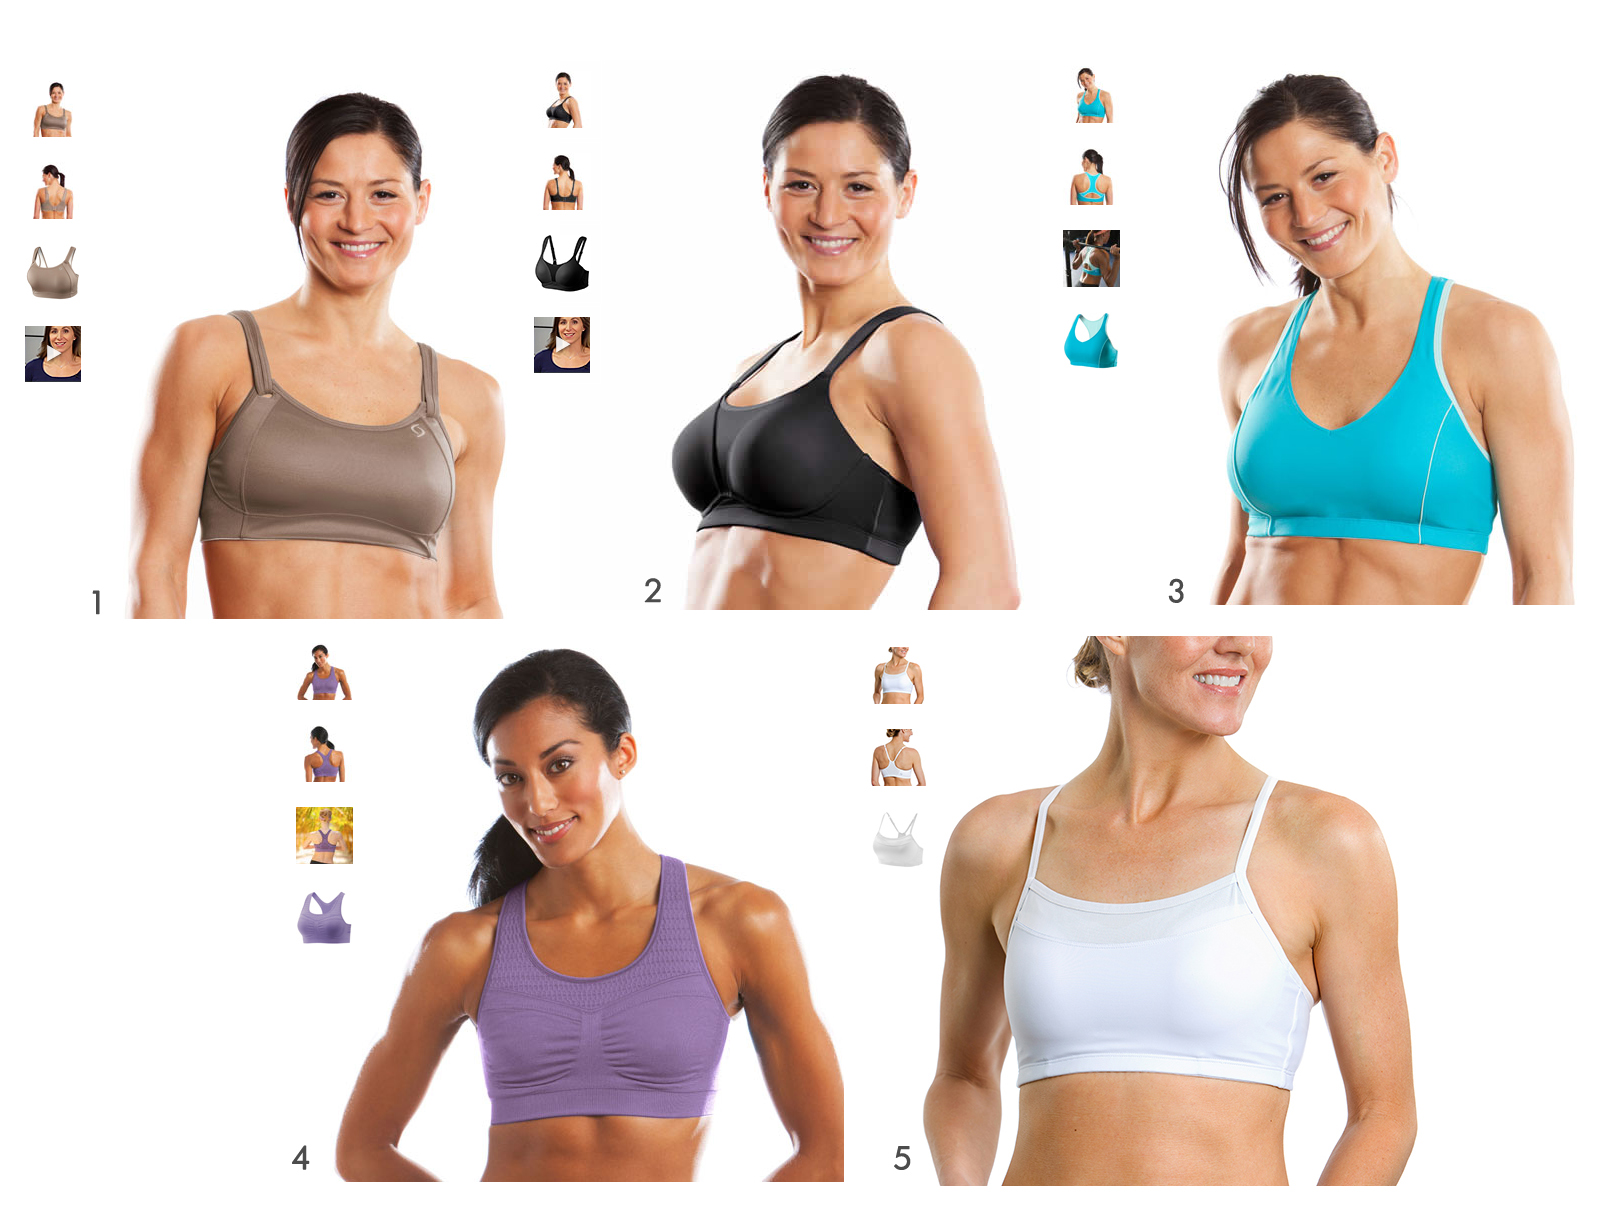 Moving Comfort Sport Bras – Choosing the right bra for your shape